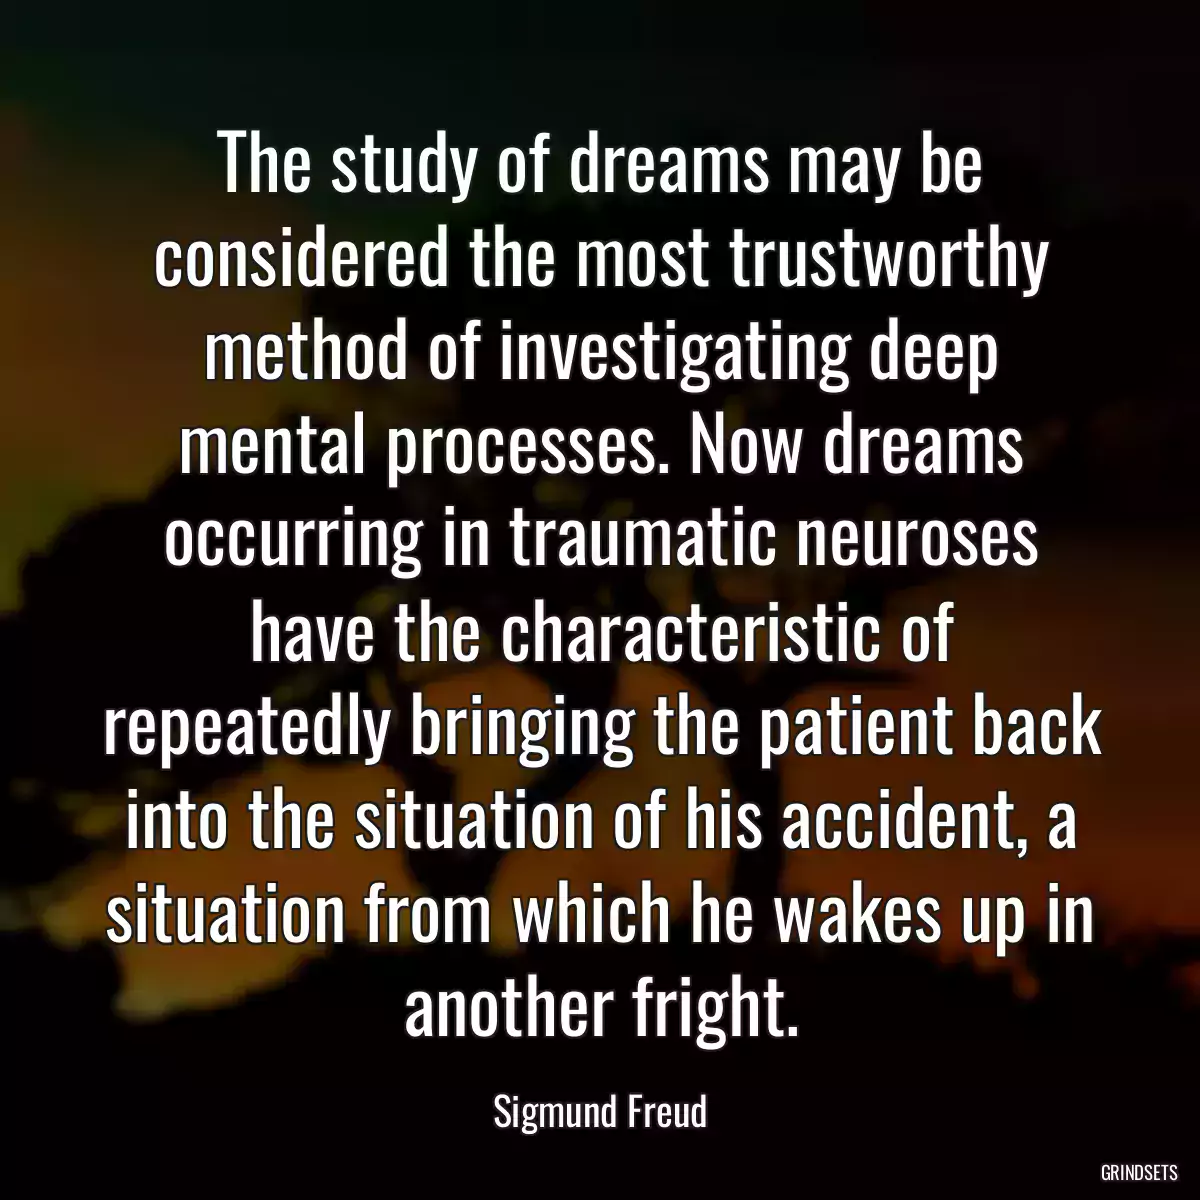 The study of dreams may be considered the most trustworthy method of investigating deep mental processes. Now dreams occurring in traumatic neuroses have the characteristic of repeatedly bringing the patient back into the situation of his accident, a situation from which he wakes up in another fright.